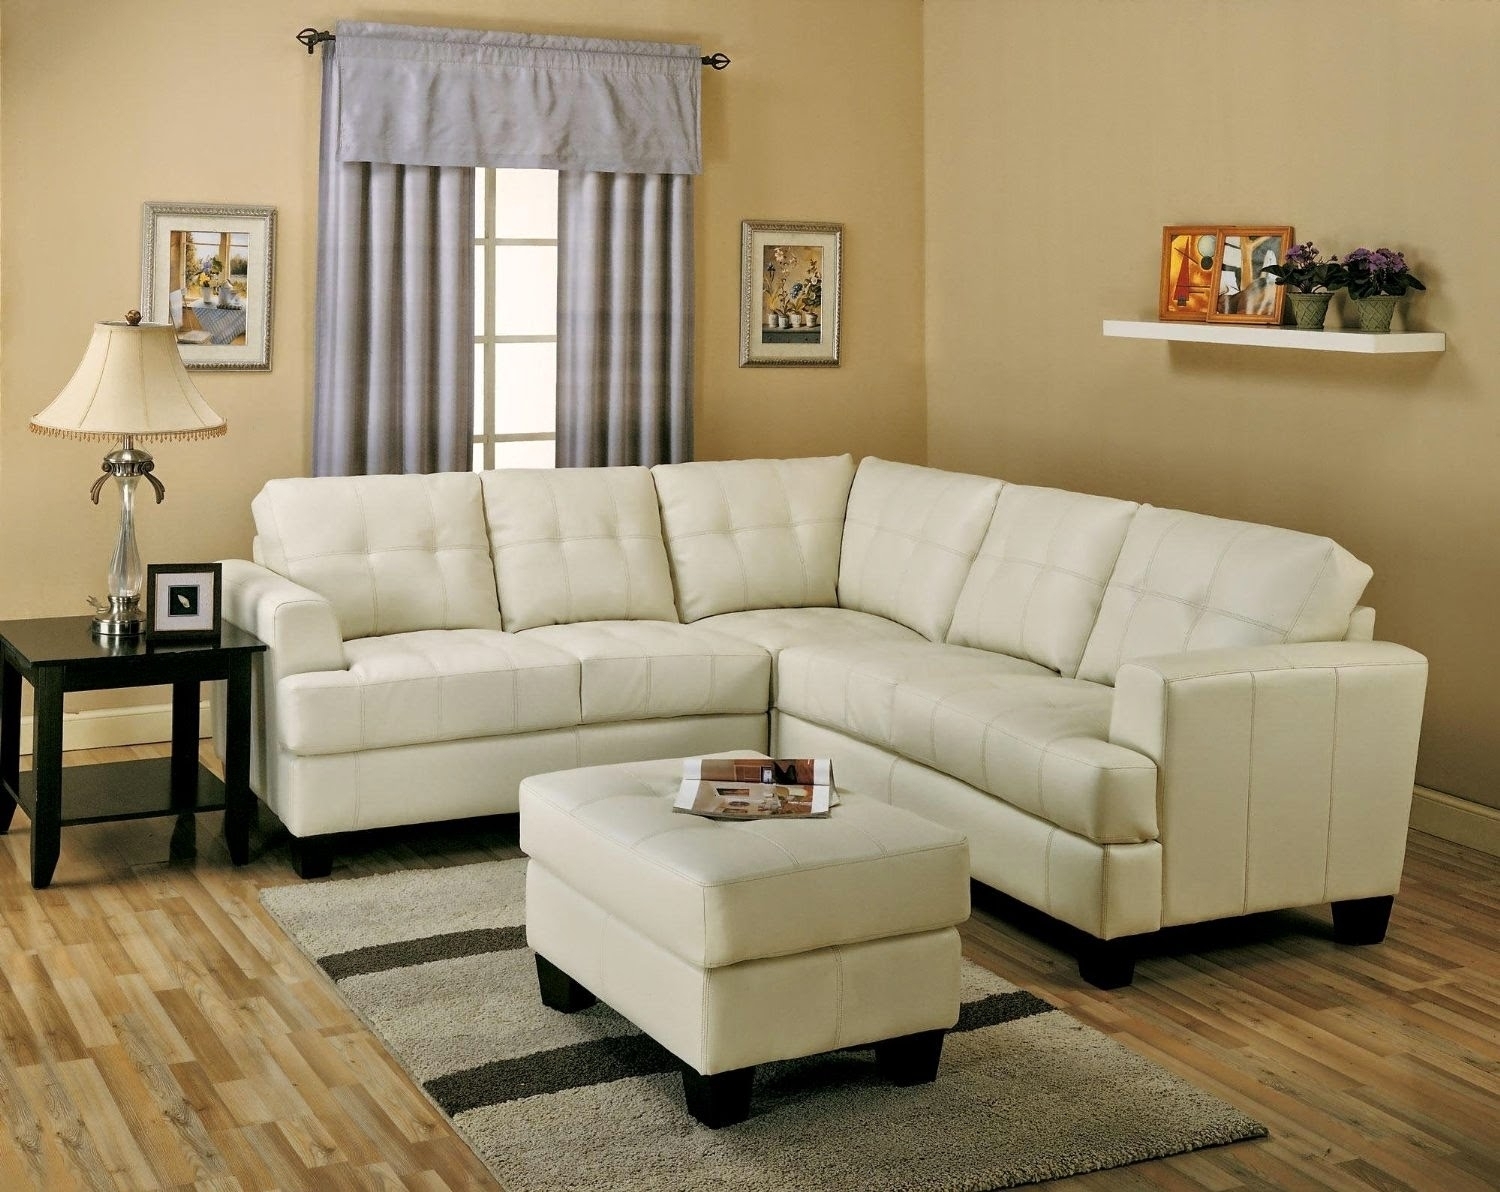 Leather Sectional For Small Living Room